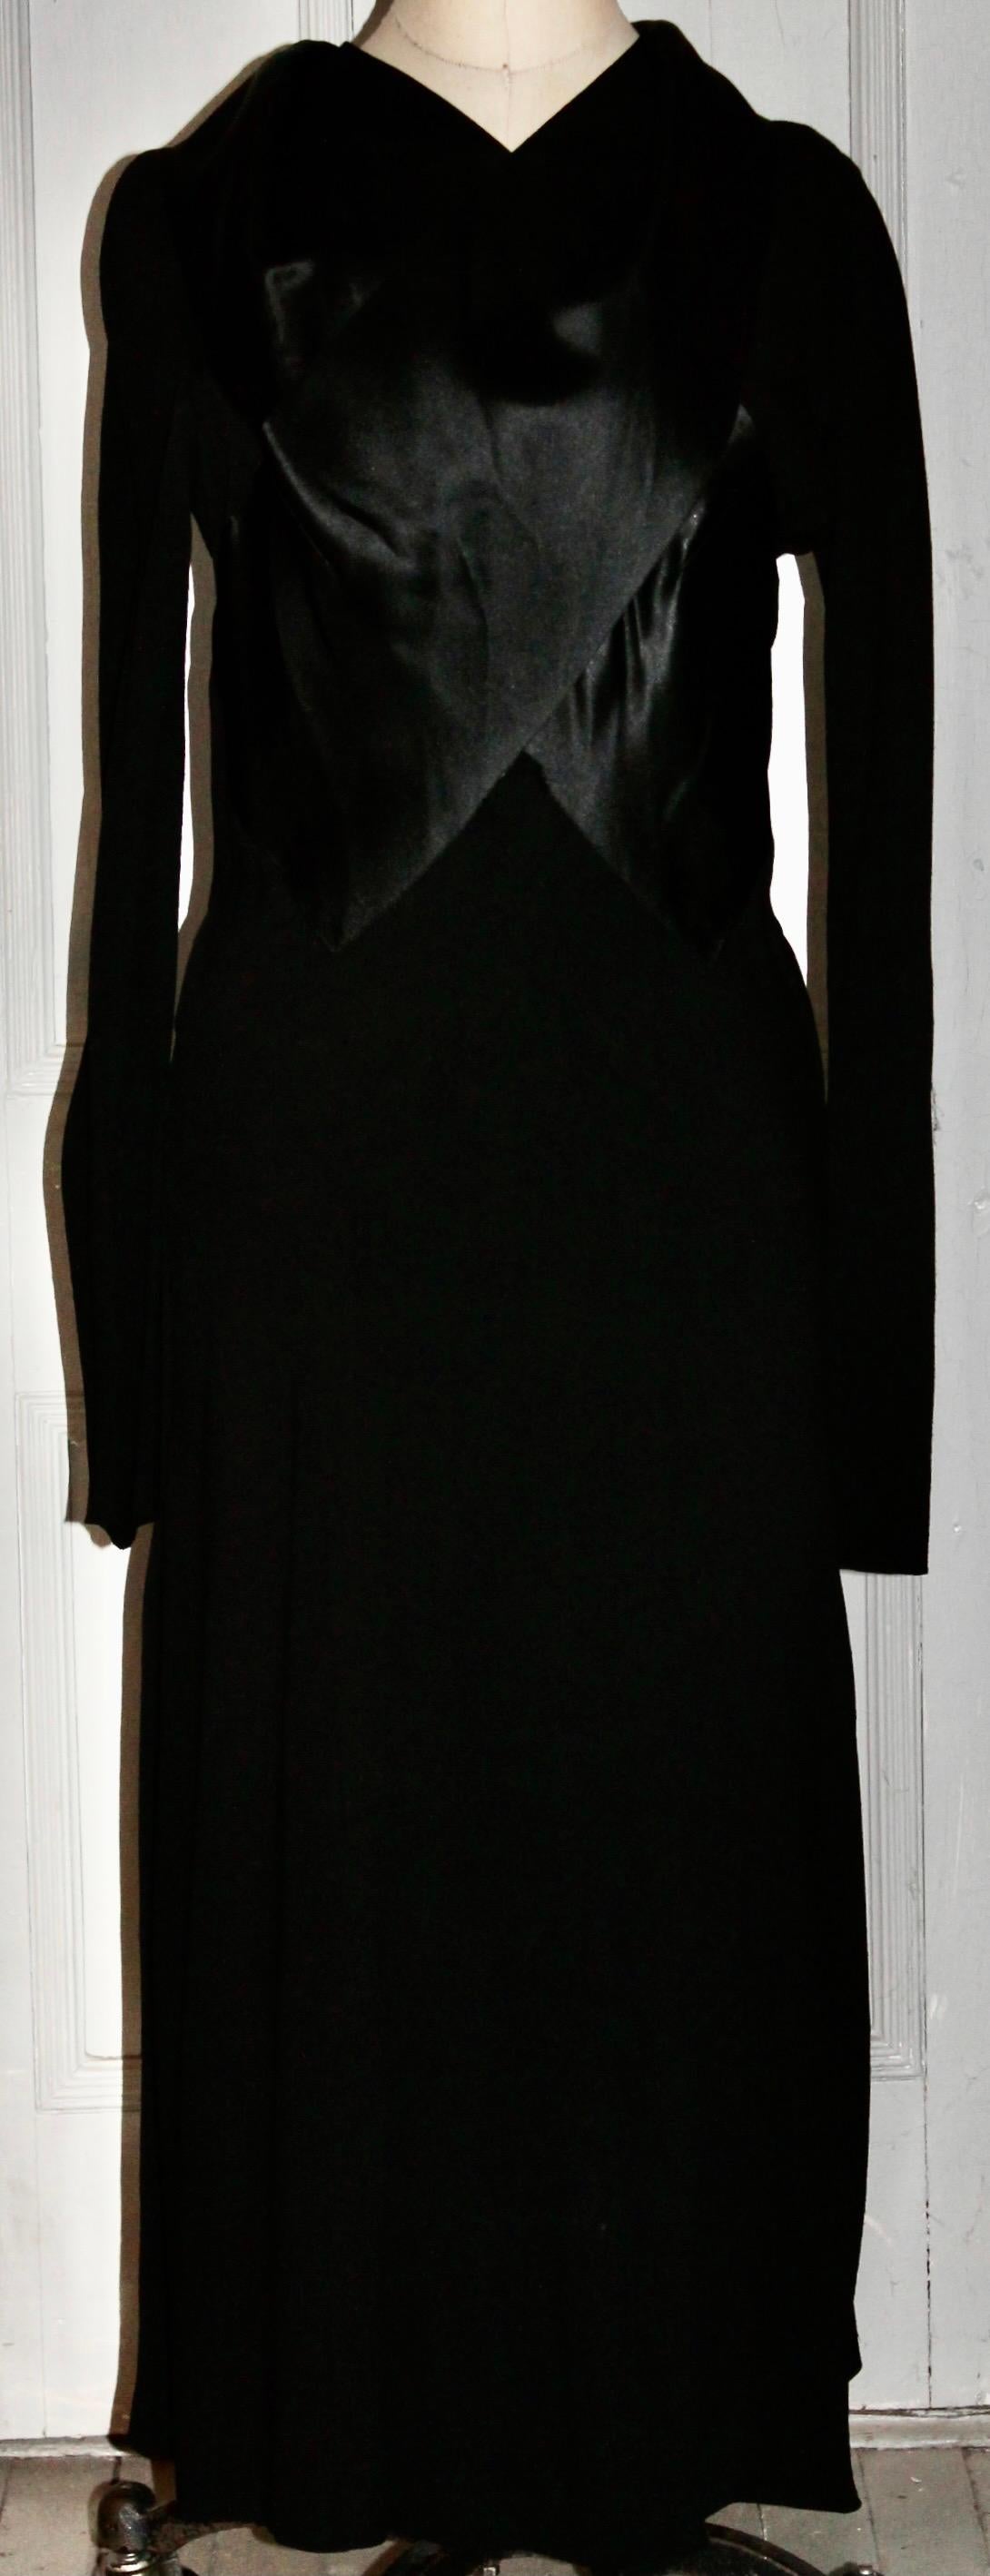 France Vramant Black Crepe Silk Evening Gown, 1930's Paris  In Good Condition For Sale In Sharon, CT